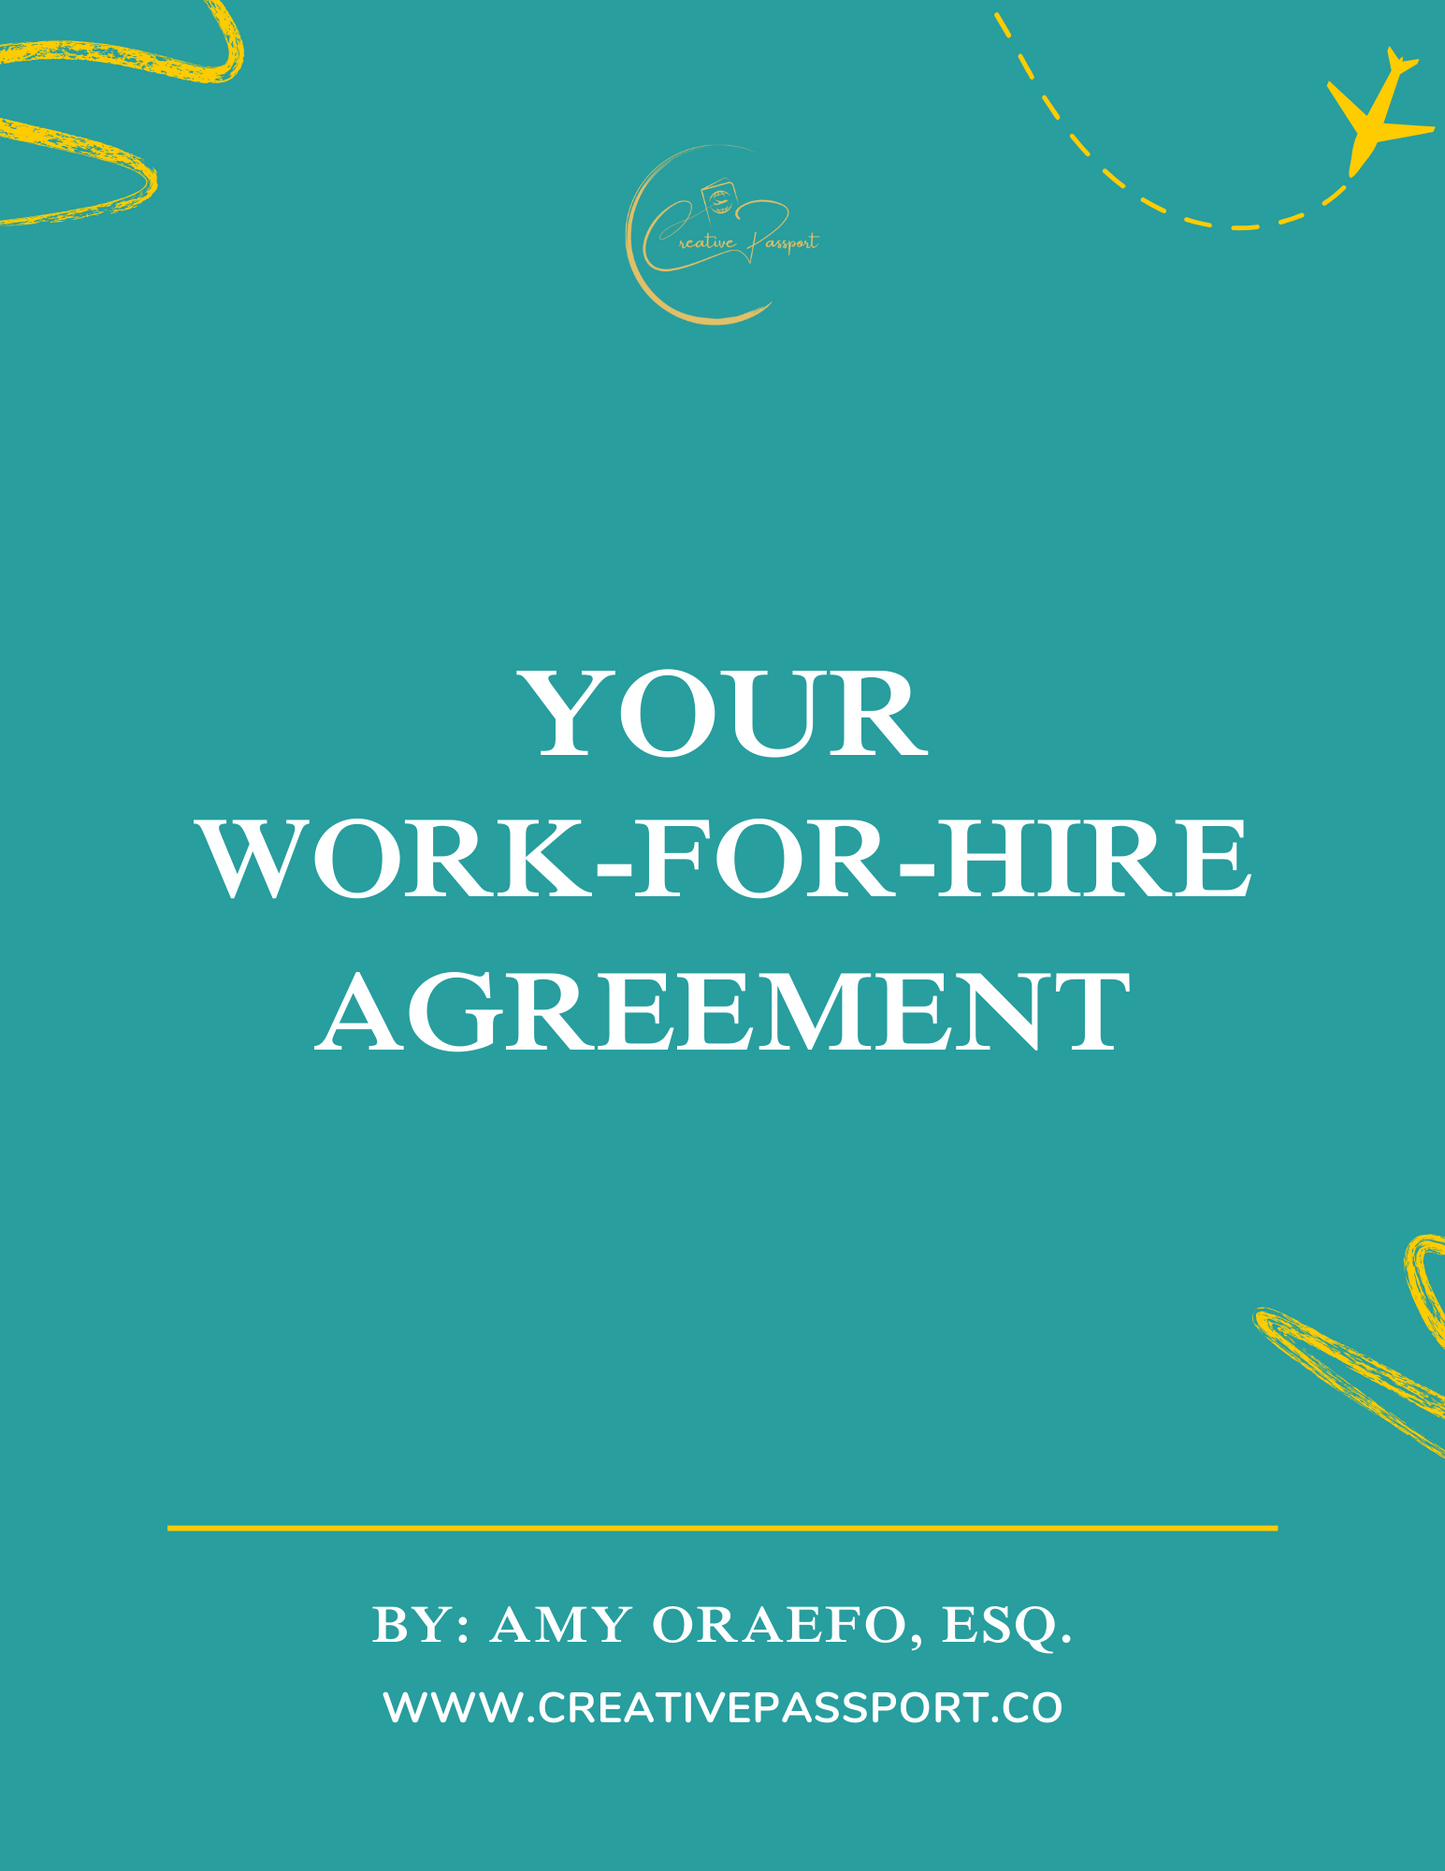 "Work-For-Hire Agreement" Digital Download